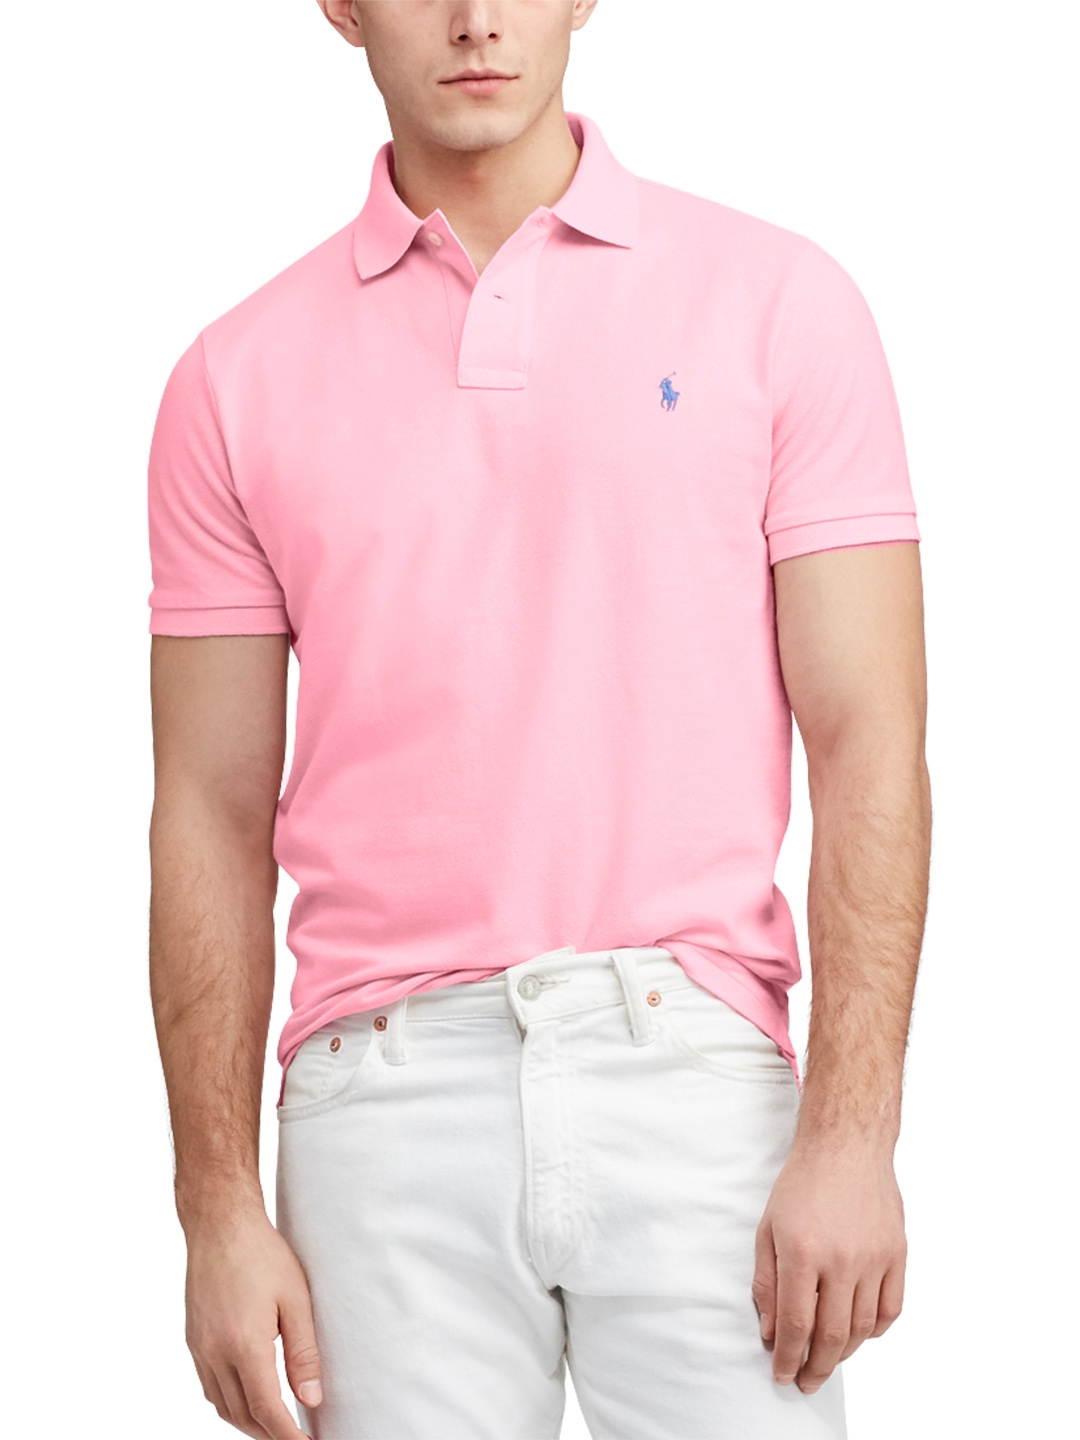 pink t shirt polo